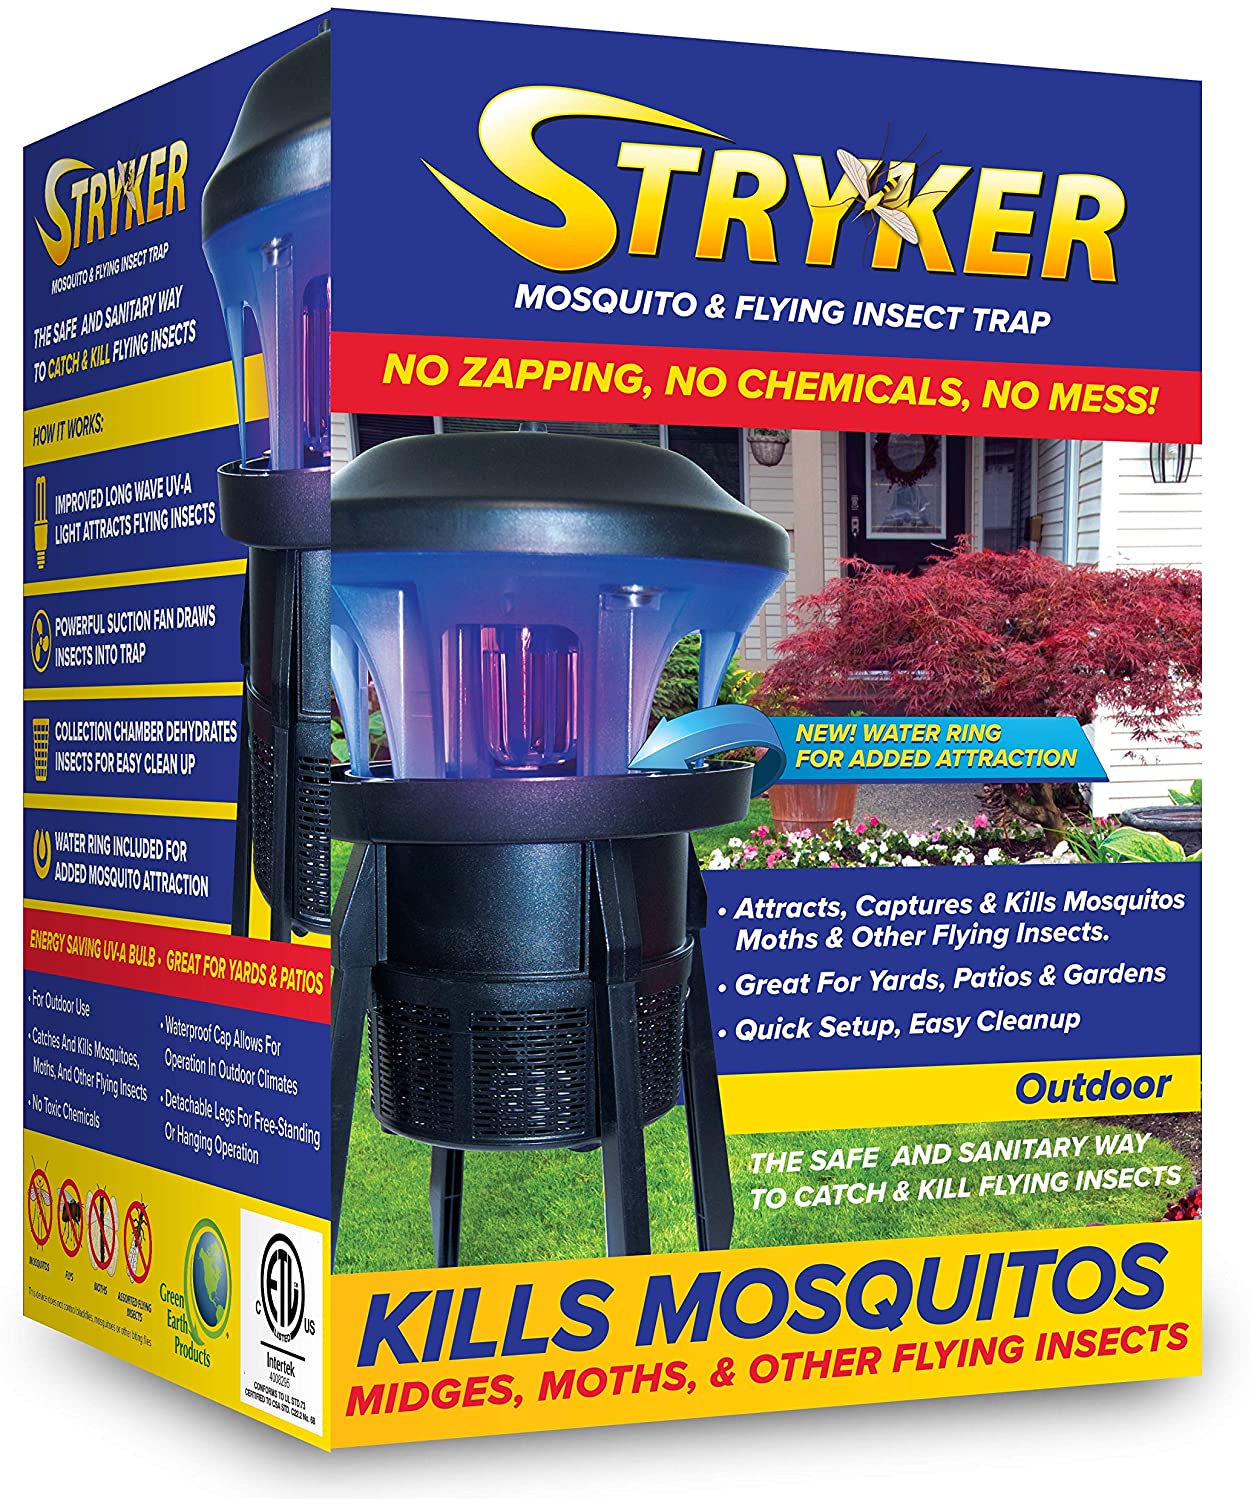 stryker mosquito trap